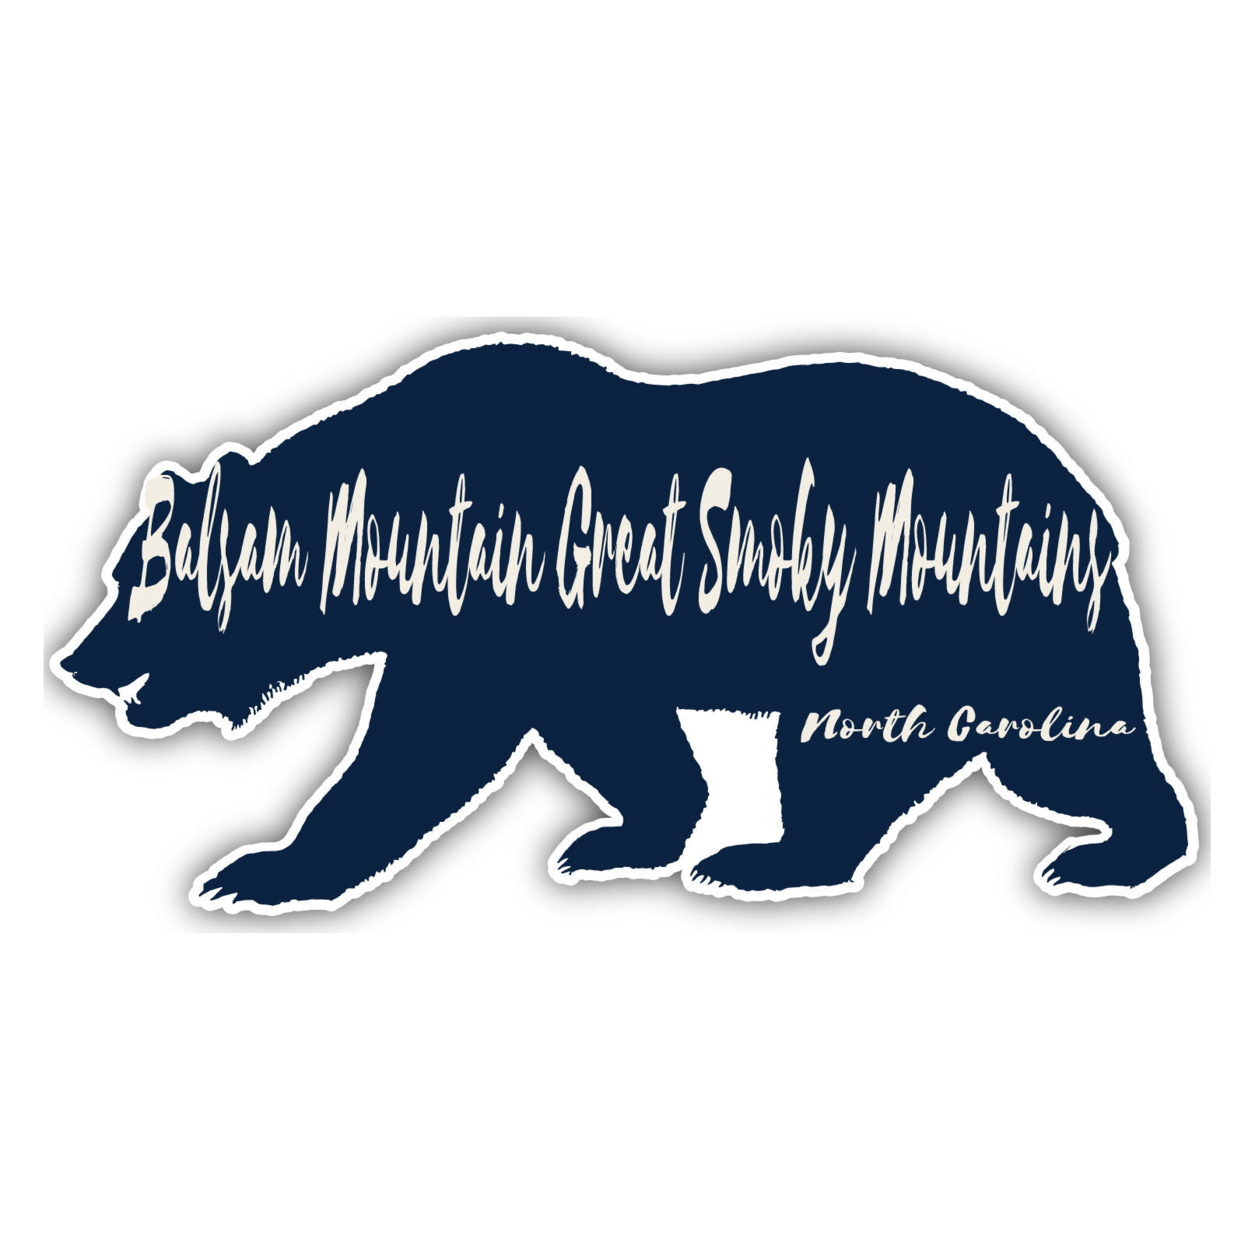 Balsam Mountain Great Smoky Mountains North Carolina Souvenir Decorative Stickers (Choose Theme And Size) - 4-Pack, 10-Inch, Bear